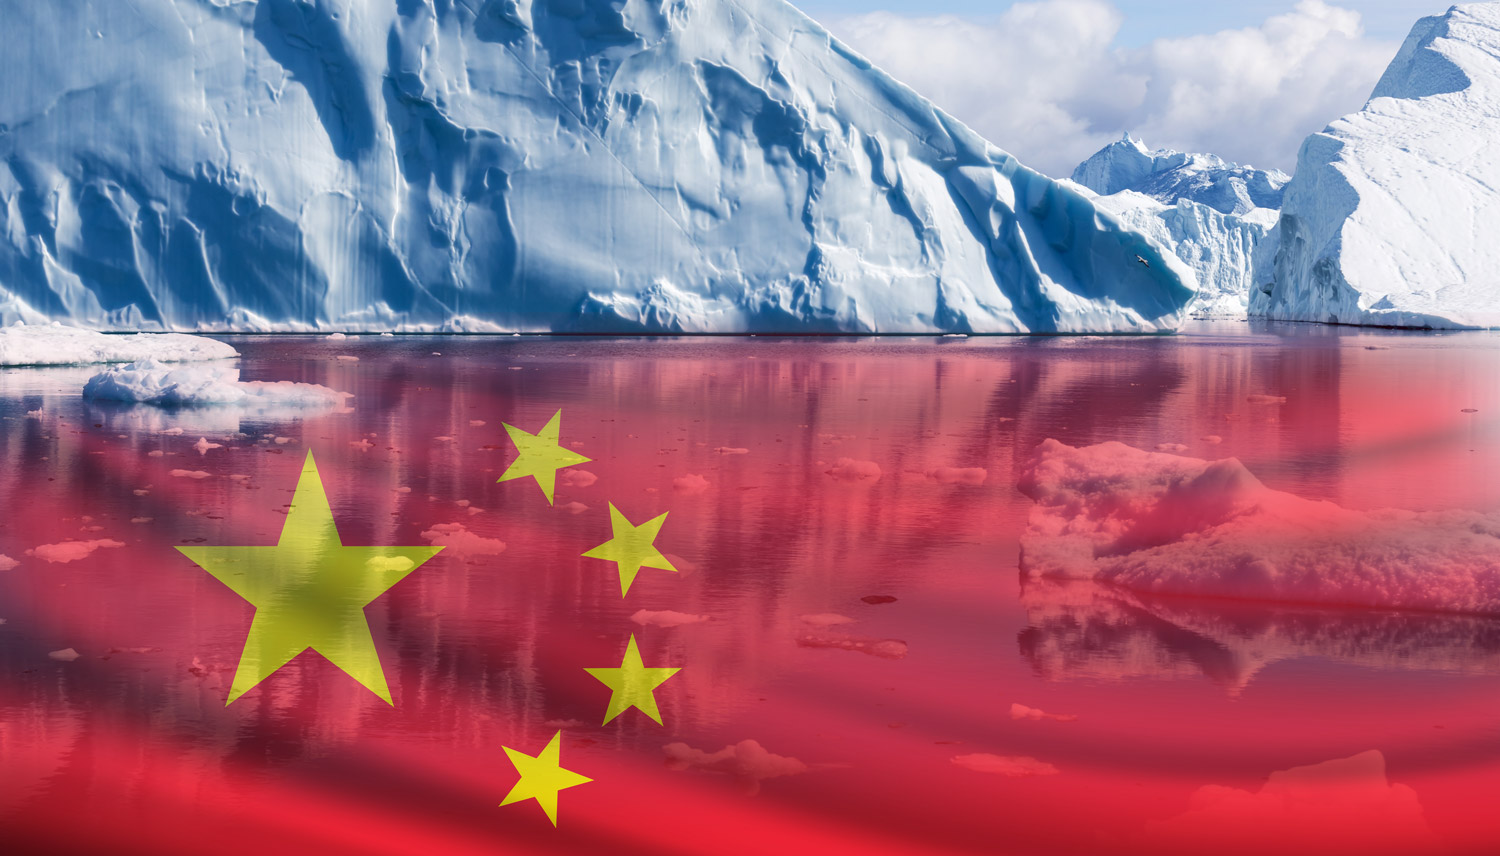 flag of china screen into water beside large glacier